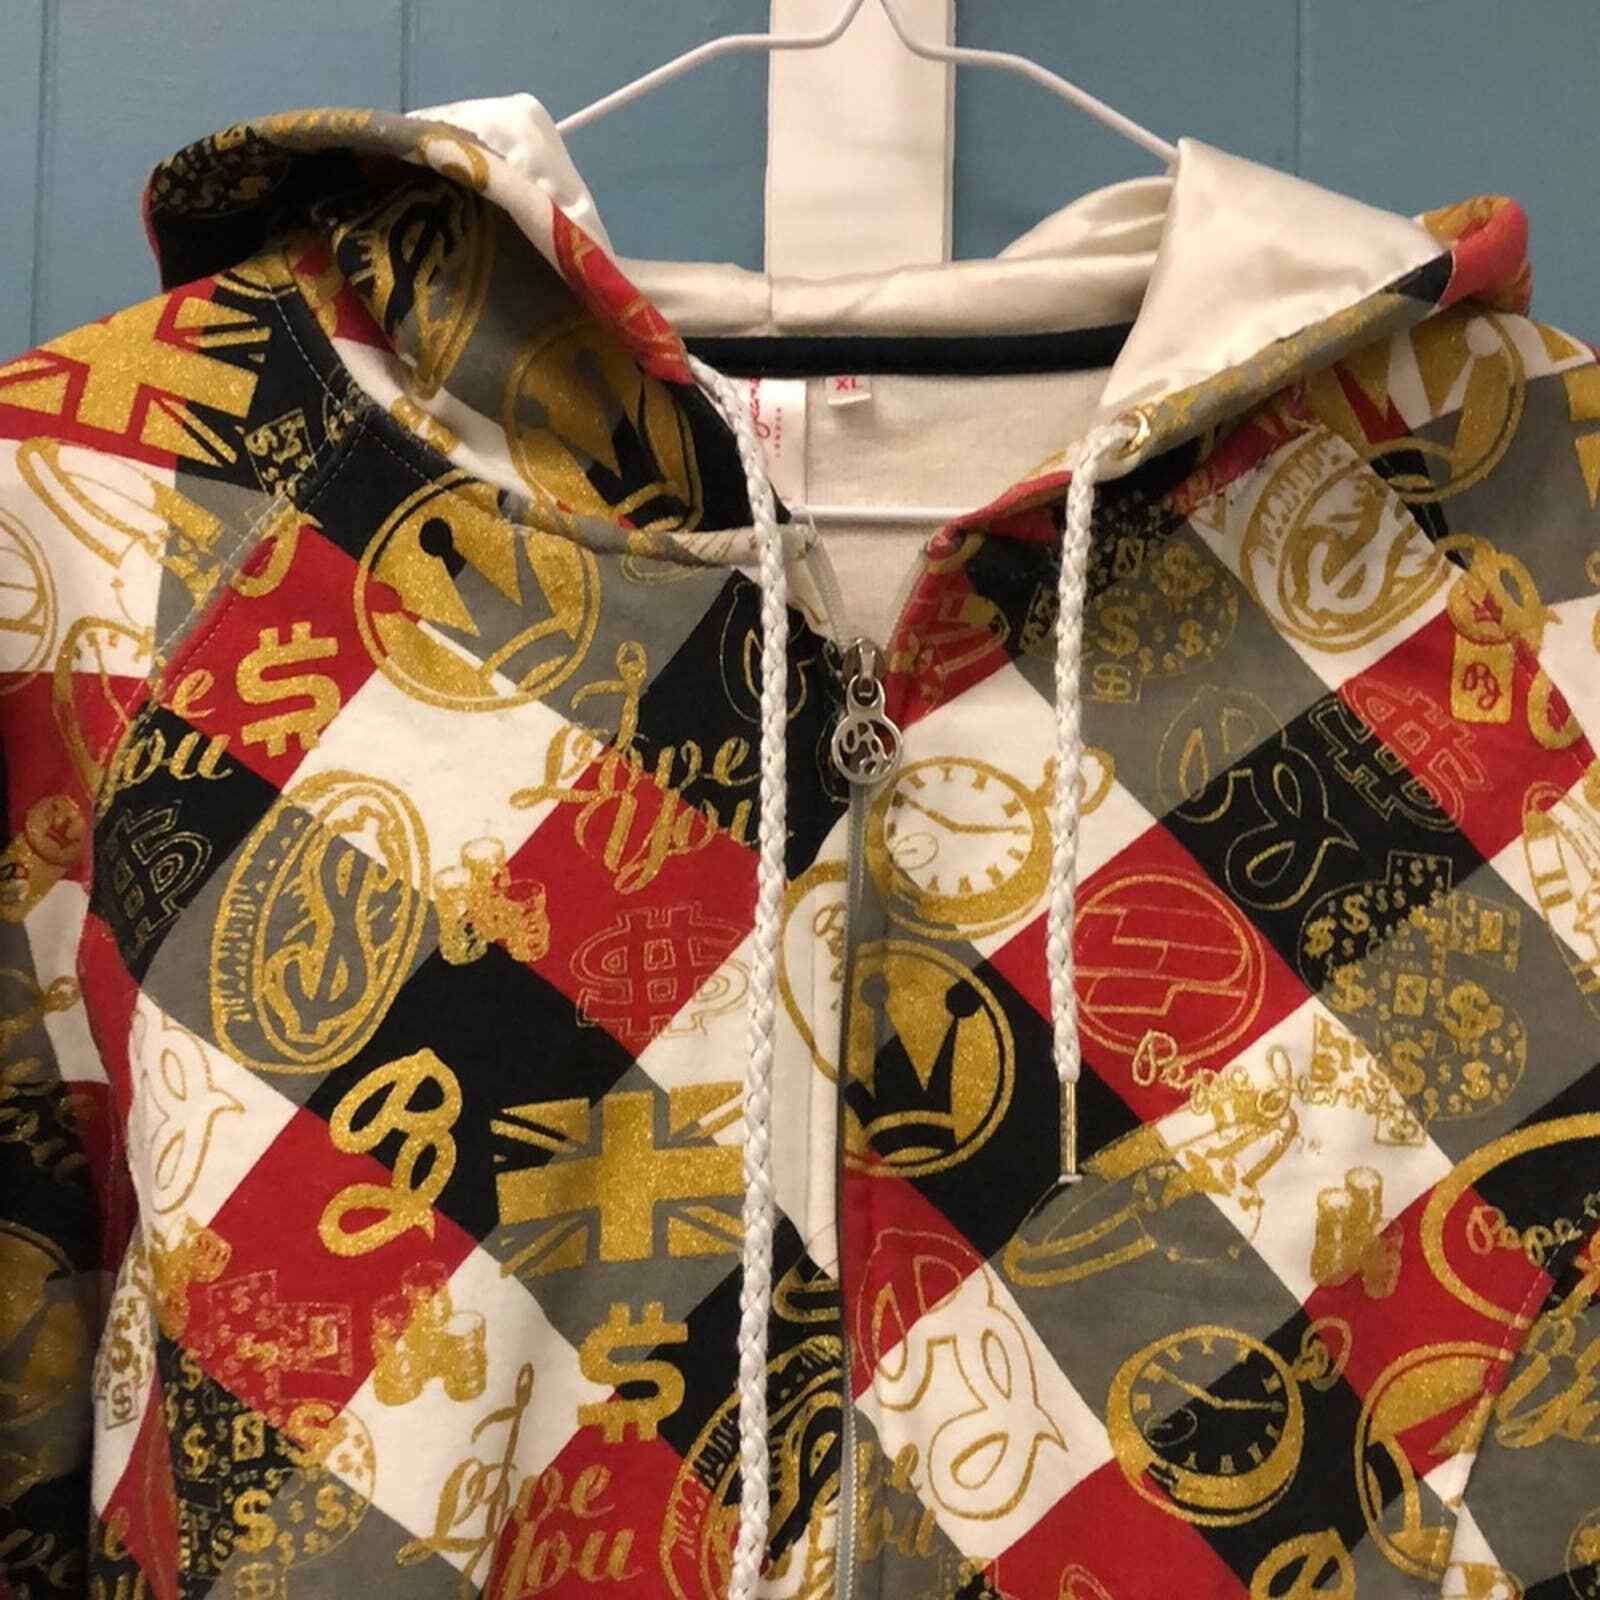 Primary image for Pepe London gold emblem $ print satin lined hoodie zip u jacket juniors size XL